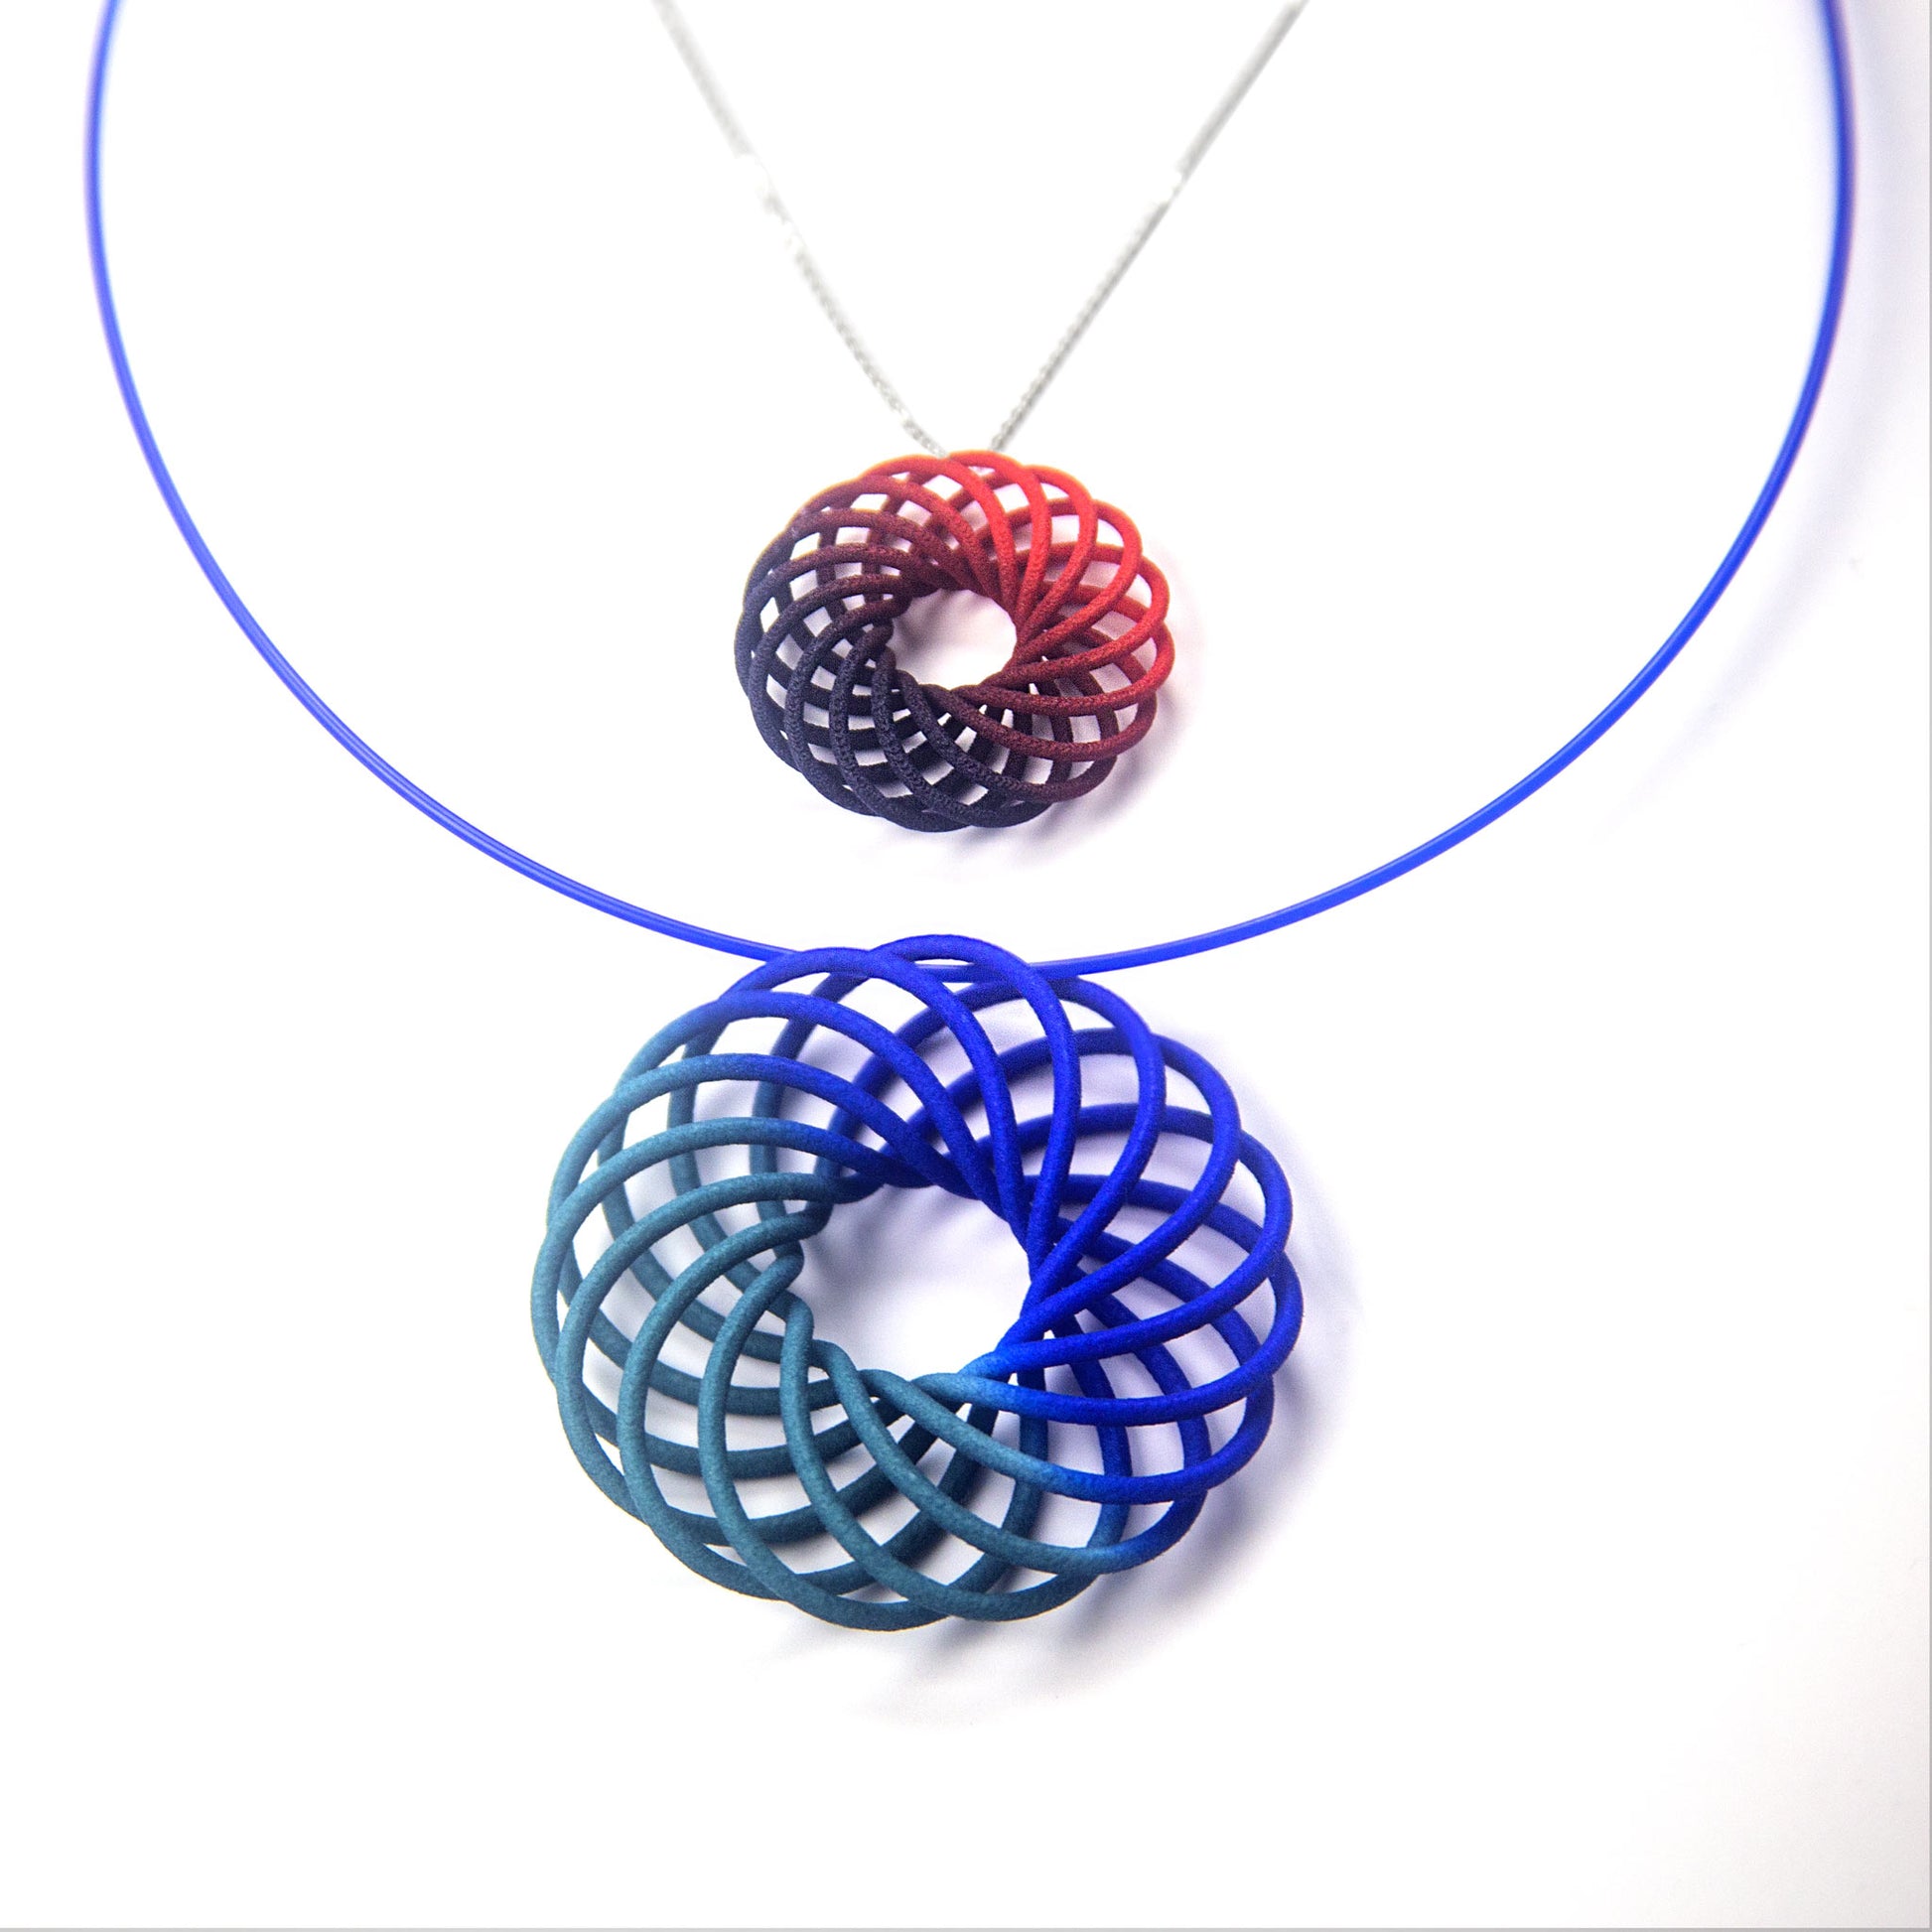 Small Vortex scarlet to purple fade pendant on a silver chain next to 5cm vortex pendant in teal to blue fade